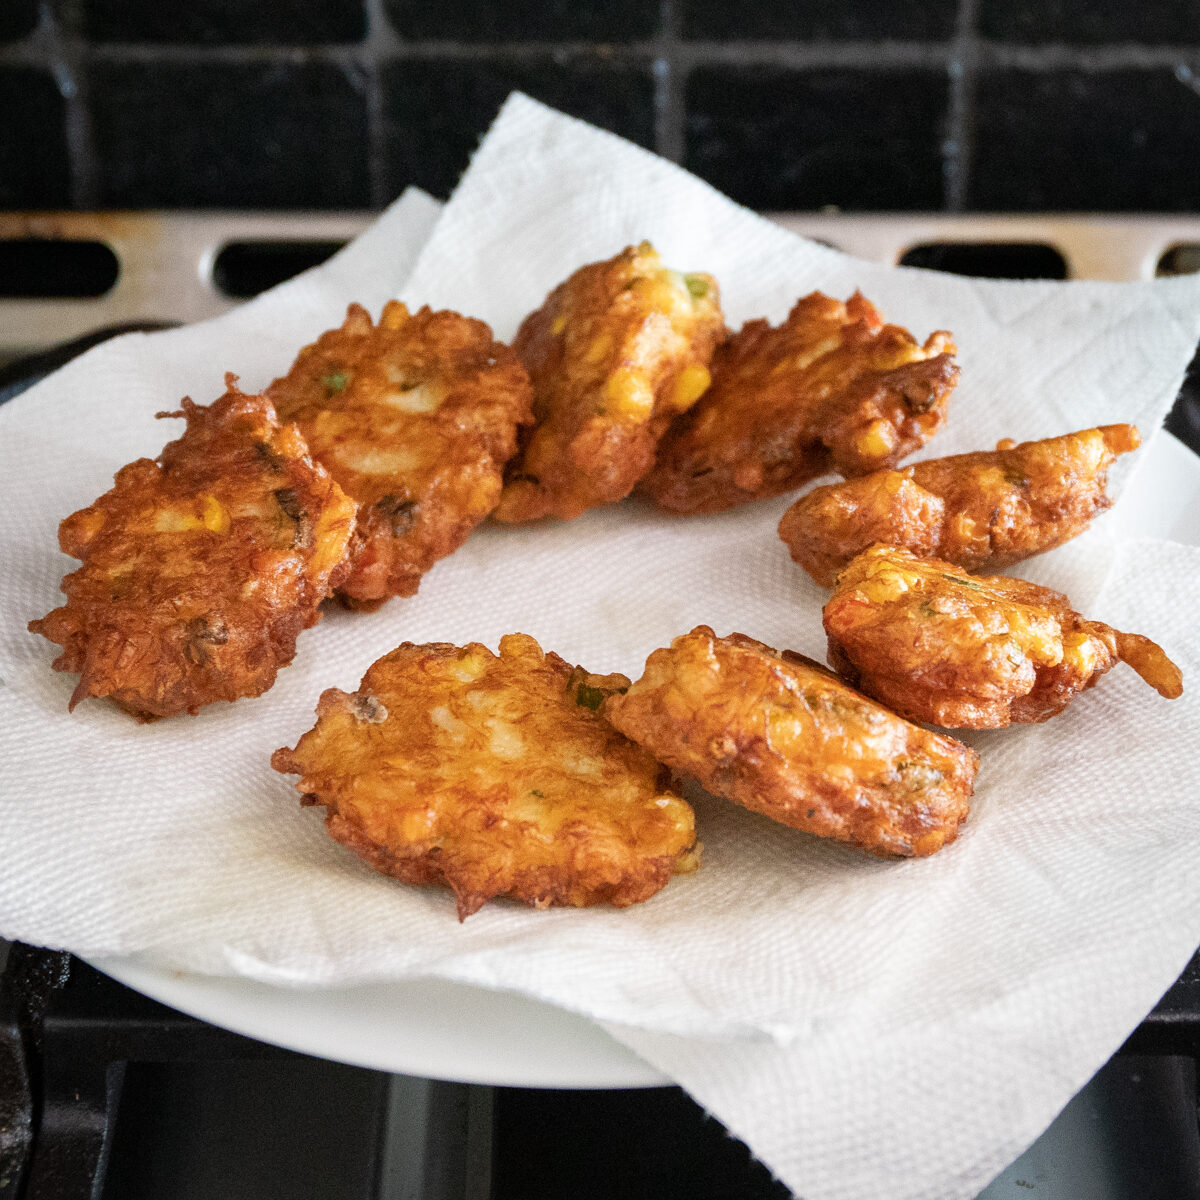 Eight golden brown crispy fritters are on a paper towel lined plate.